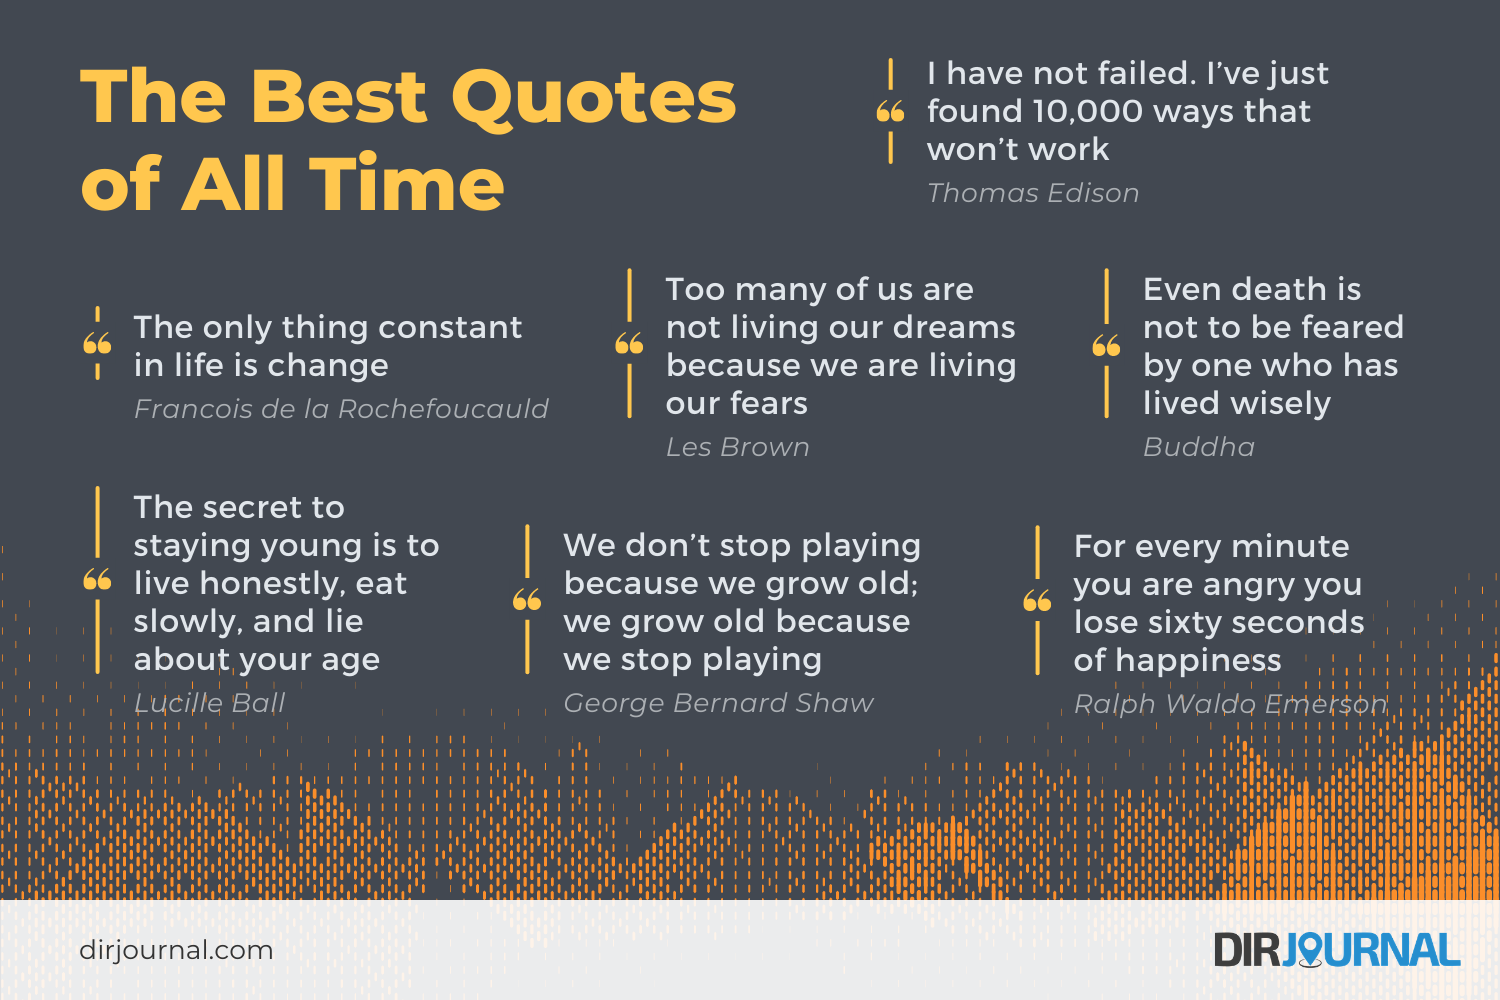 The Best Quotes of All Time Edition)